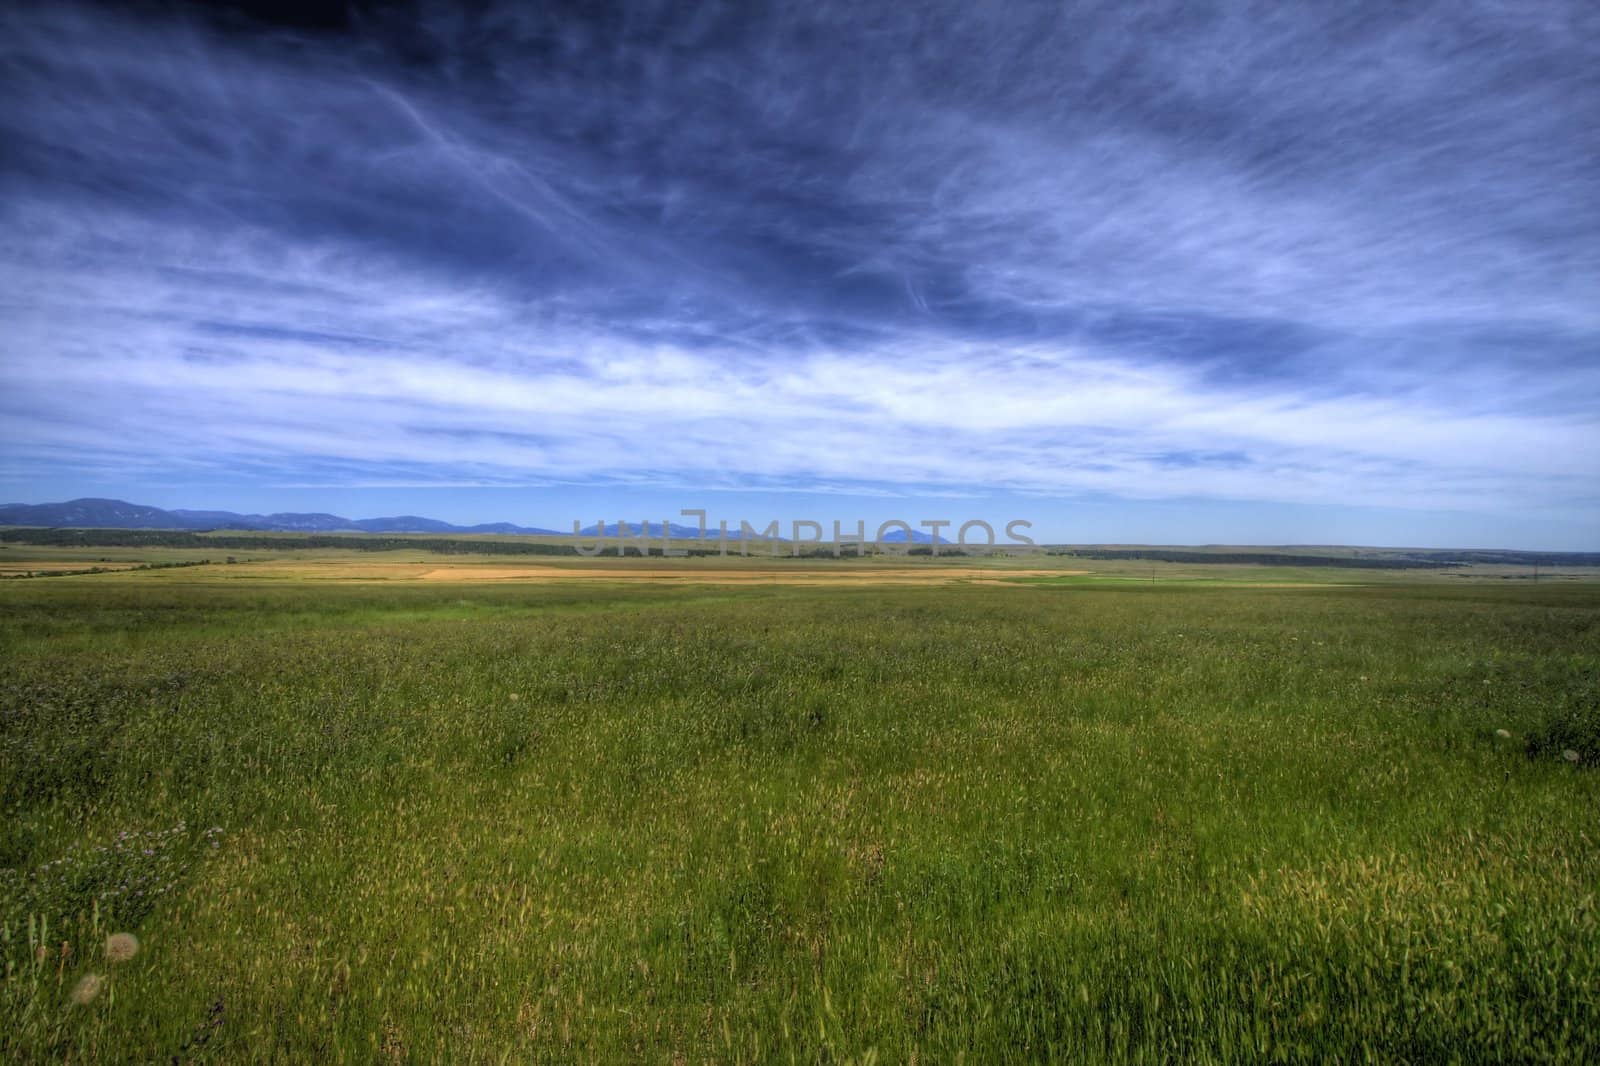 Wide open space across the prairie in this HDR image.